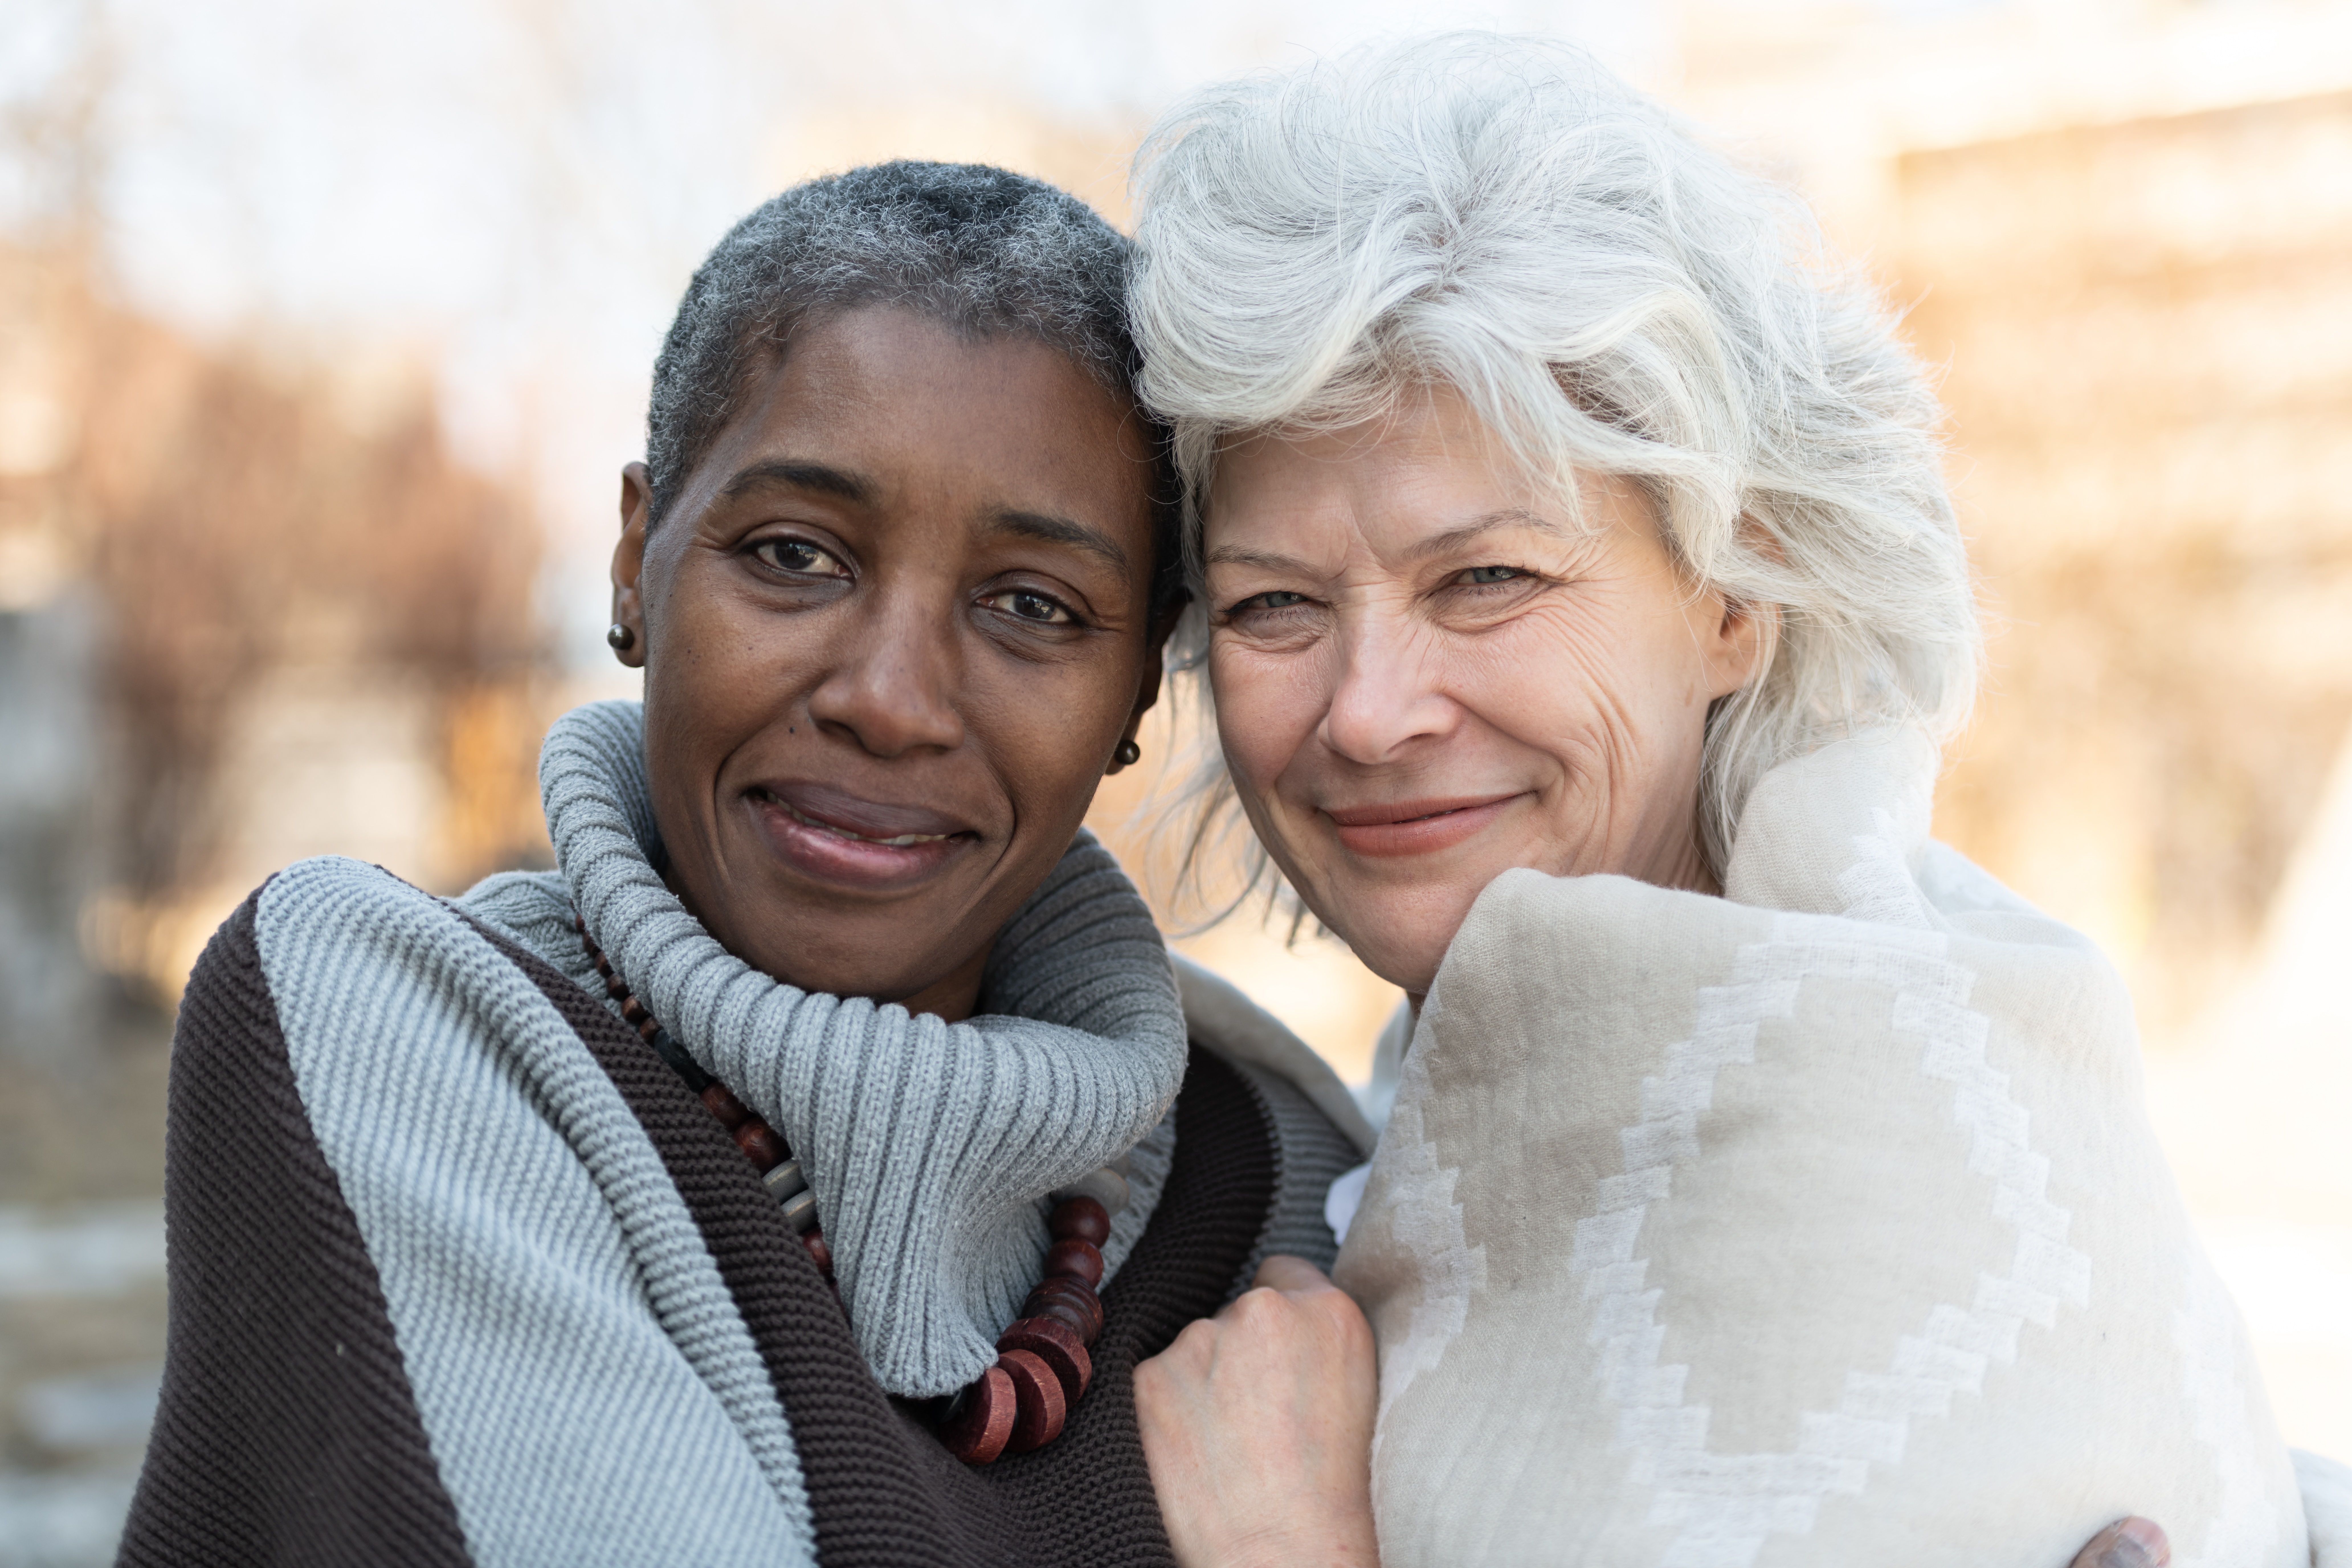 Two senior friends laugh affectionately together. The women are standing outside on a sunny but cool day. They are dressed in casual sweaters. One woman is of African descent and the other is Caucasian.